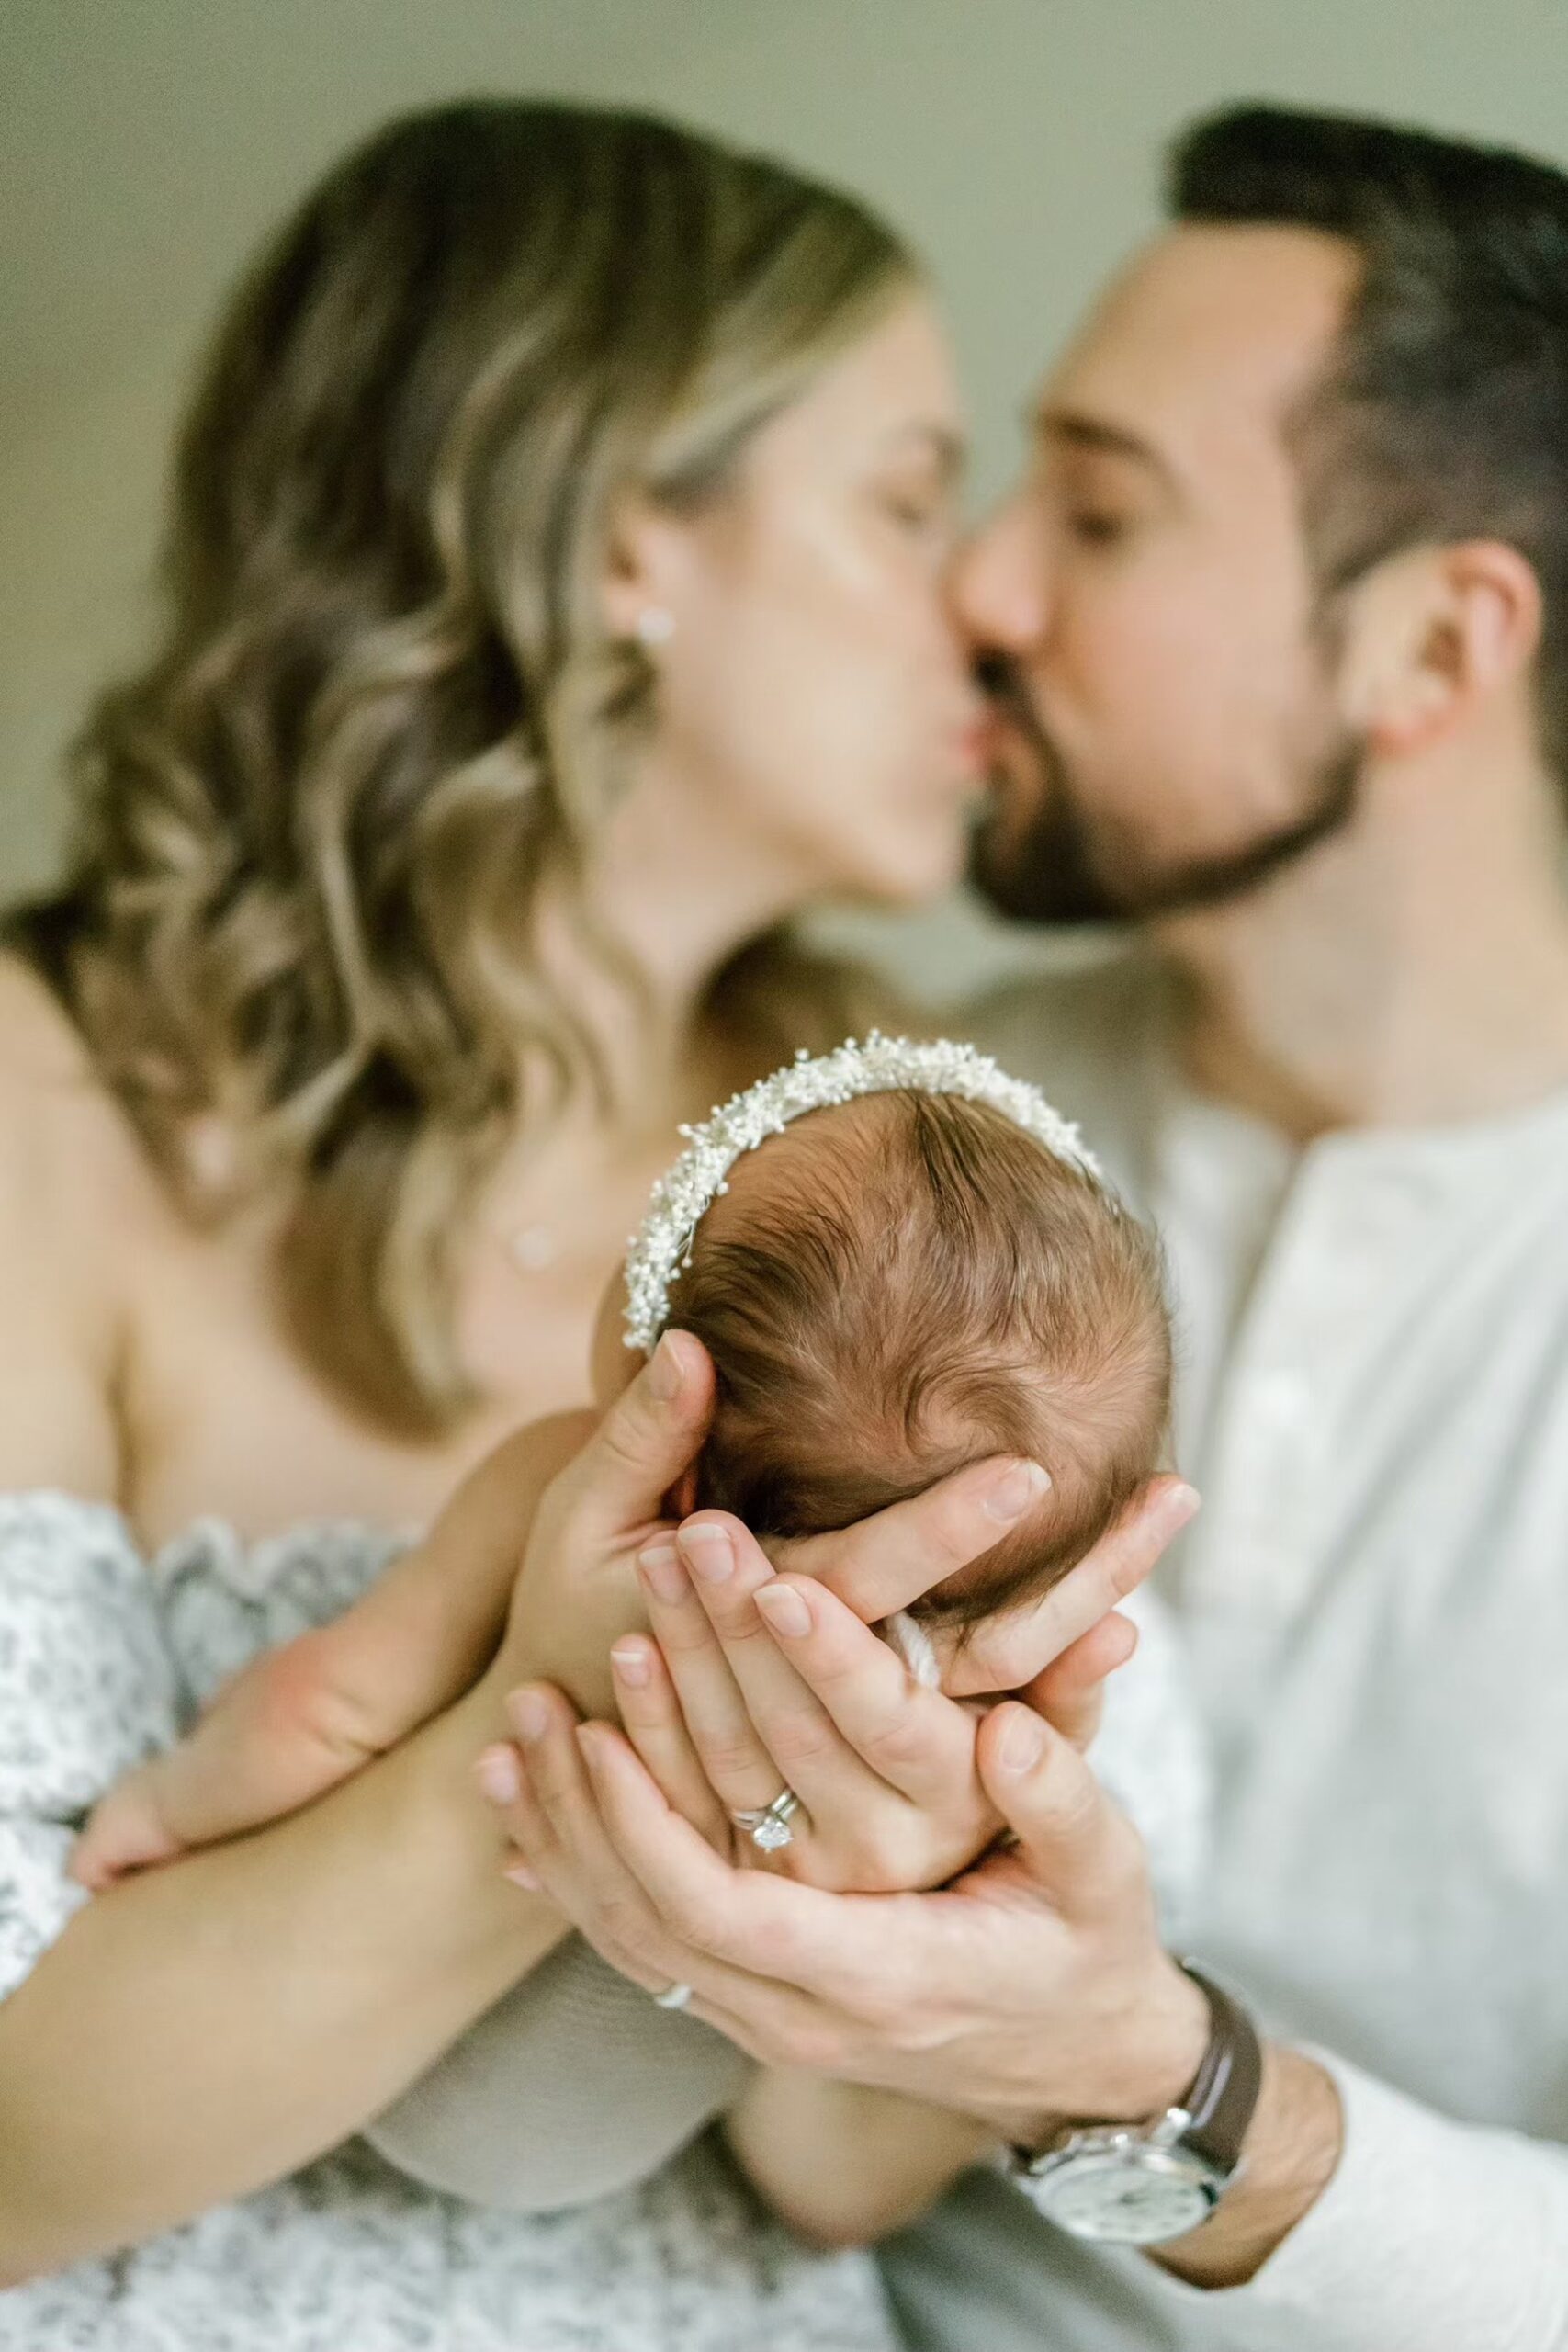 Man and woman kiss while holding newborn baby